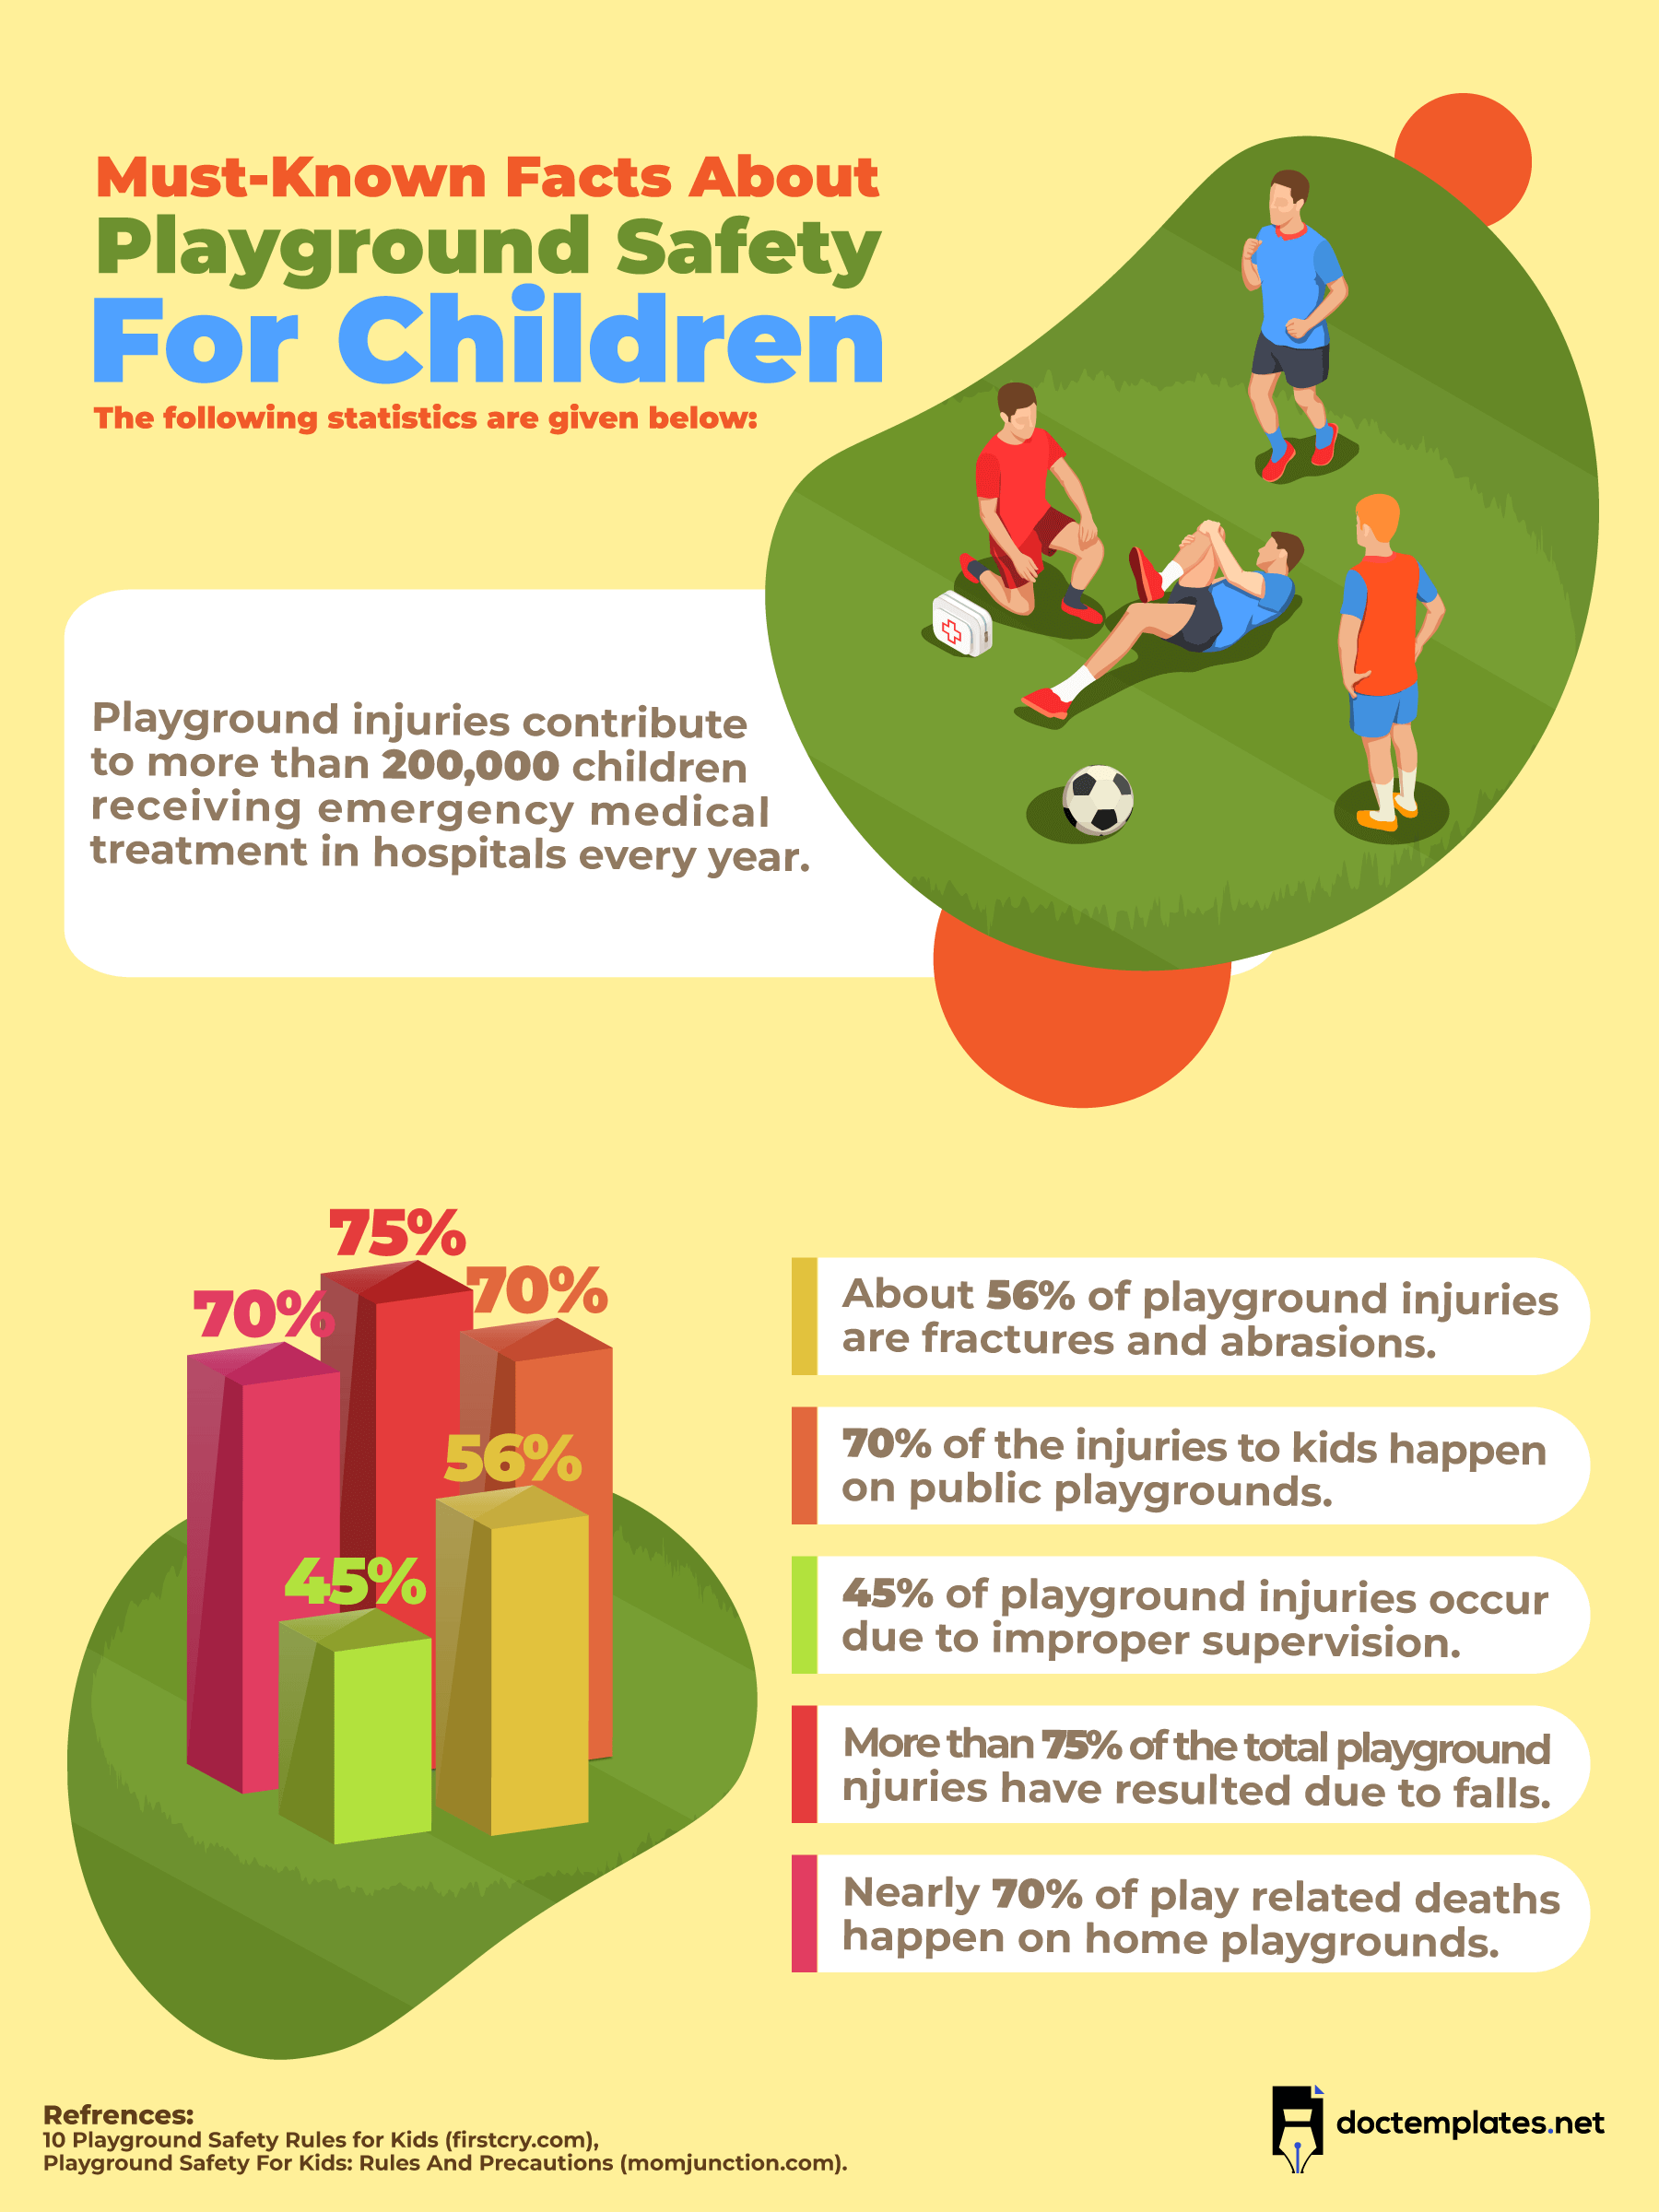 This infographic is about children playground safety facts.